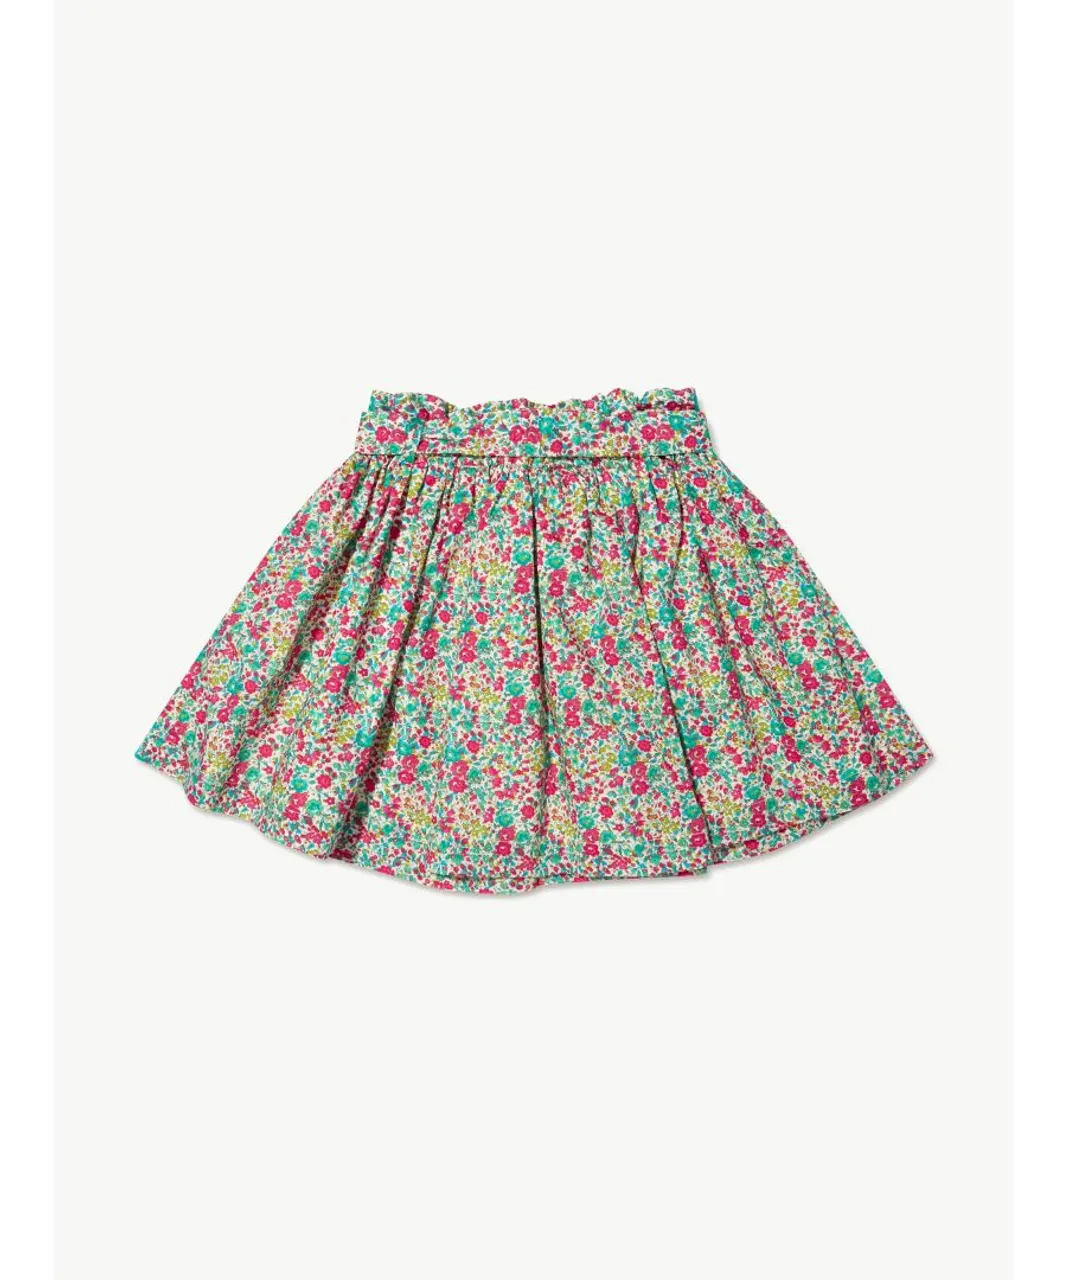 Bonpoint Girls Floral Tuie Skirt in Mint - Green